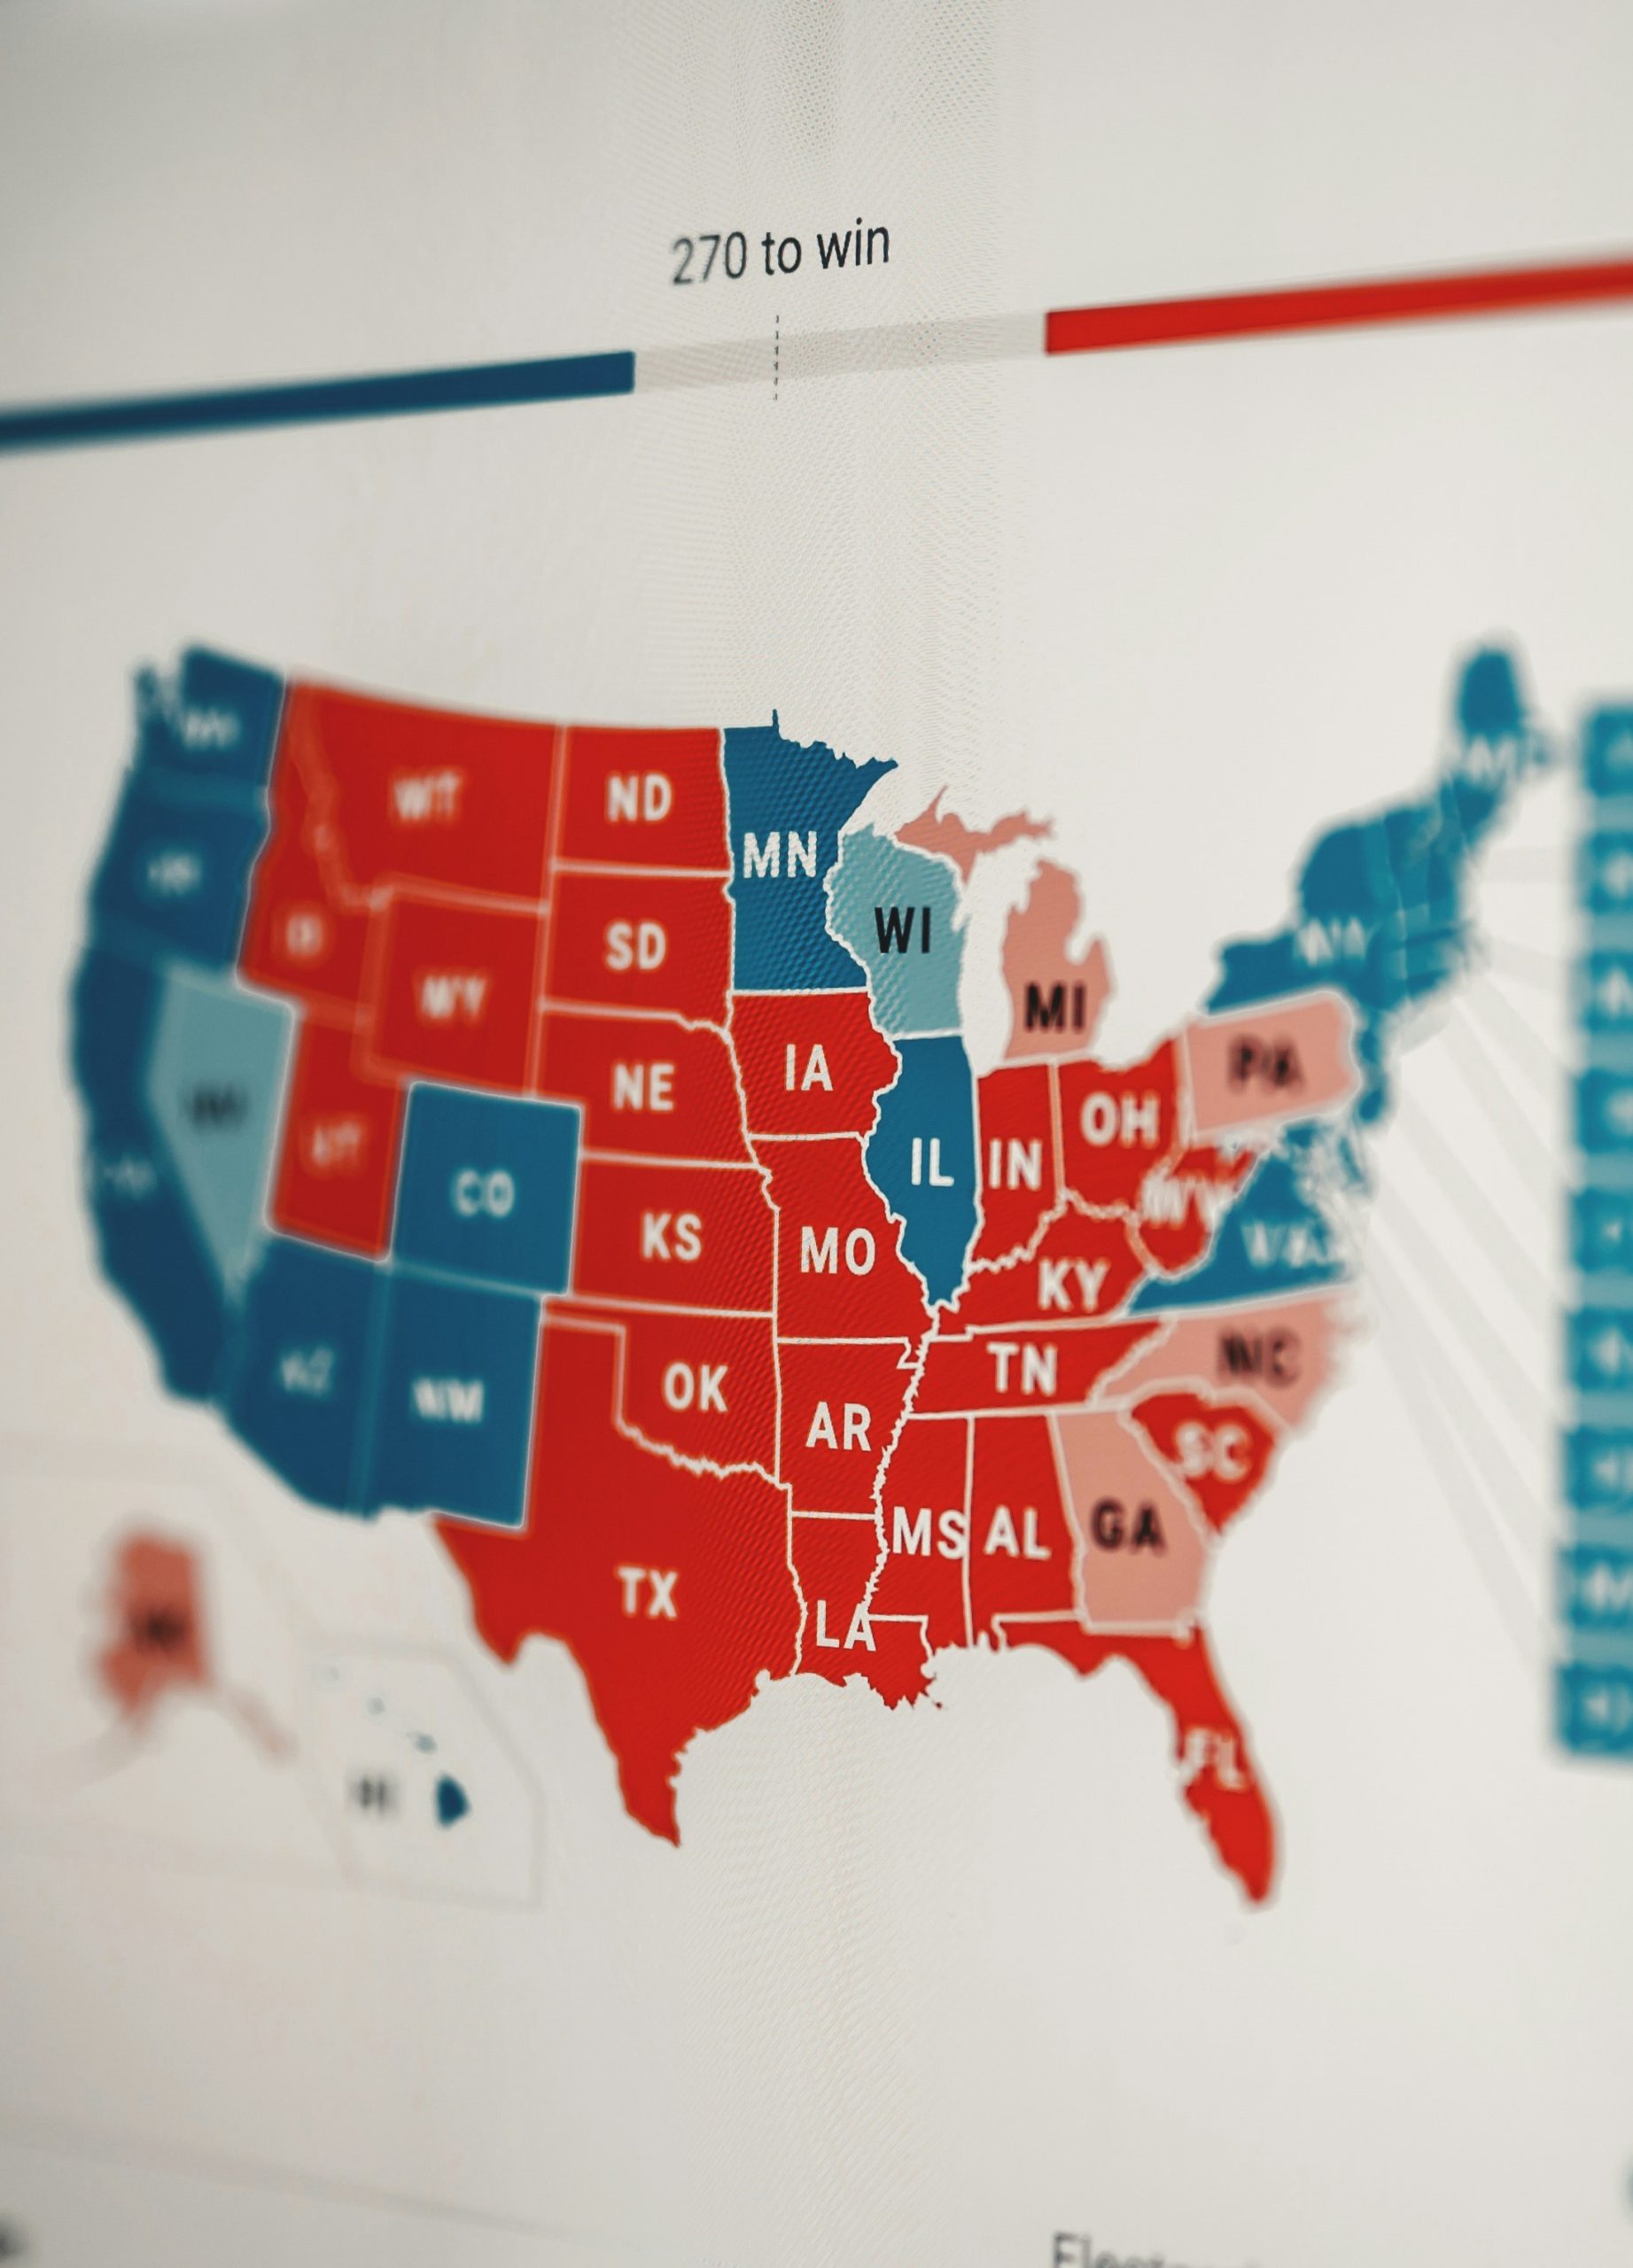 map showing states as red or blue based on electoral votes during the 2020 presidential election